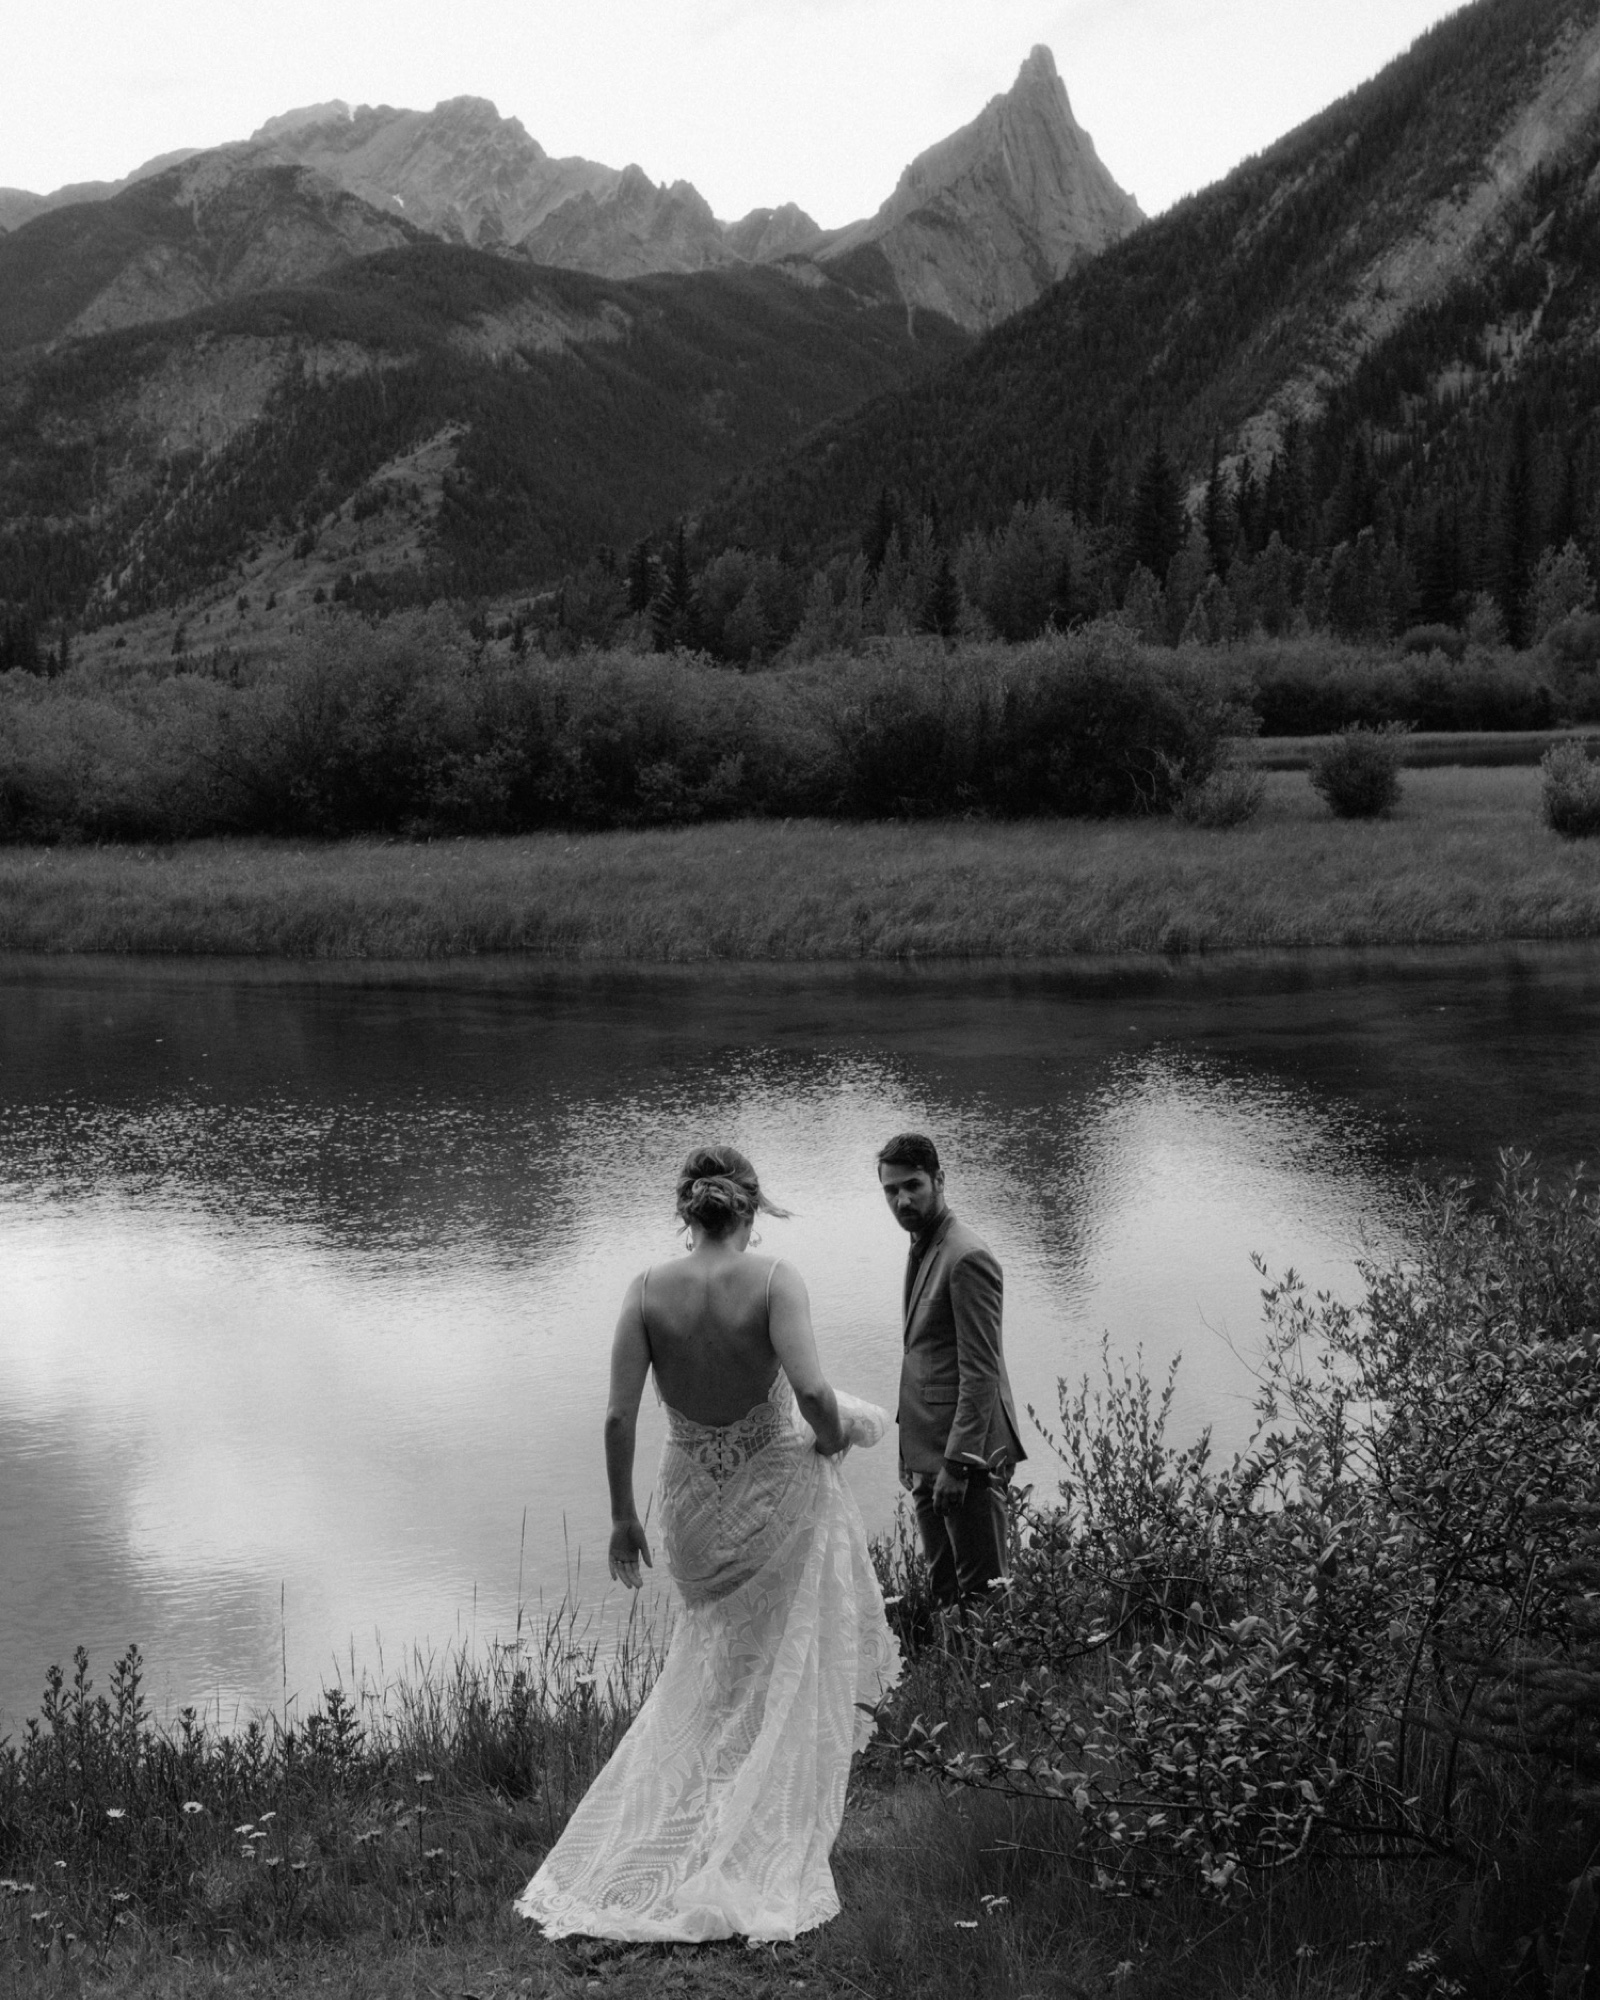 Mount Louis as a wedding photo backdrop in Banff National Park from Sundance Canyon trail